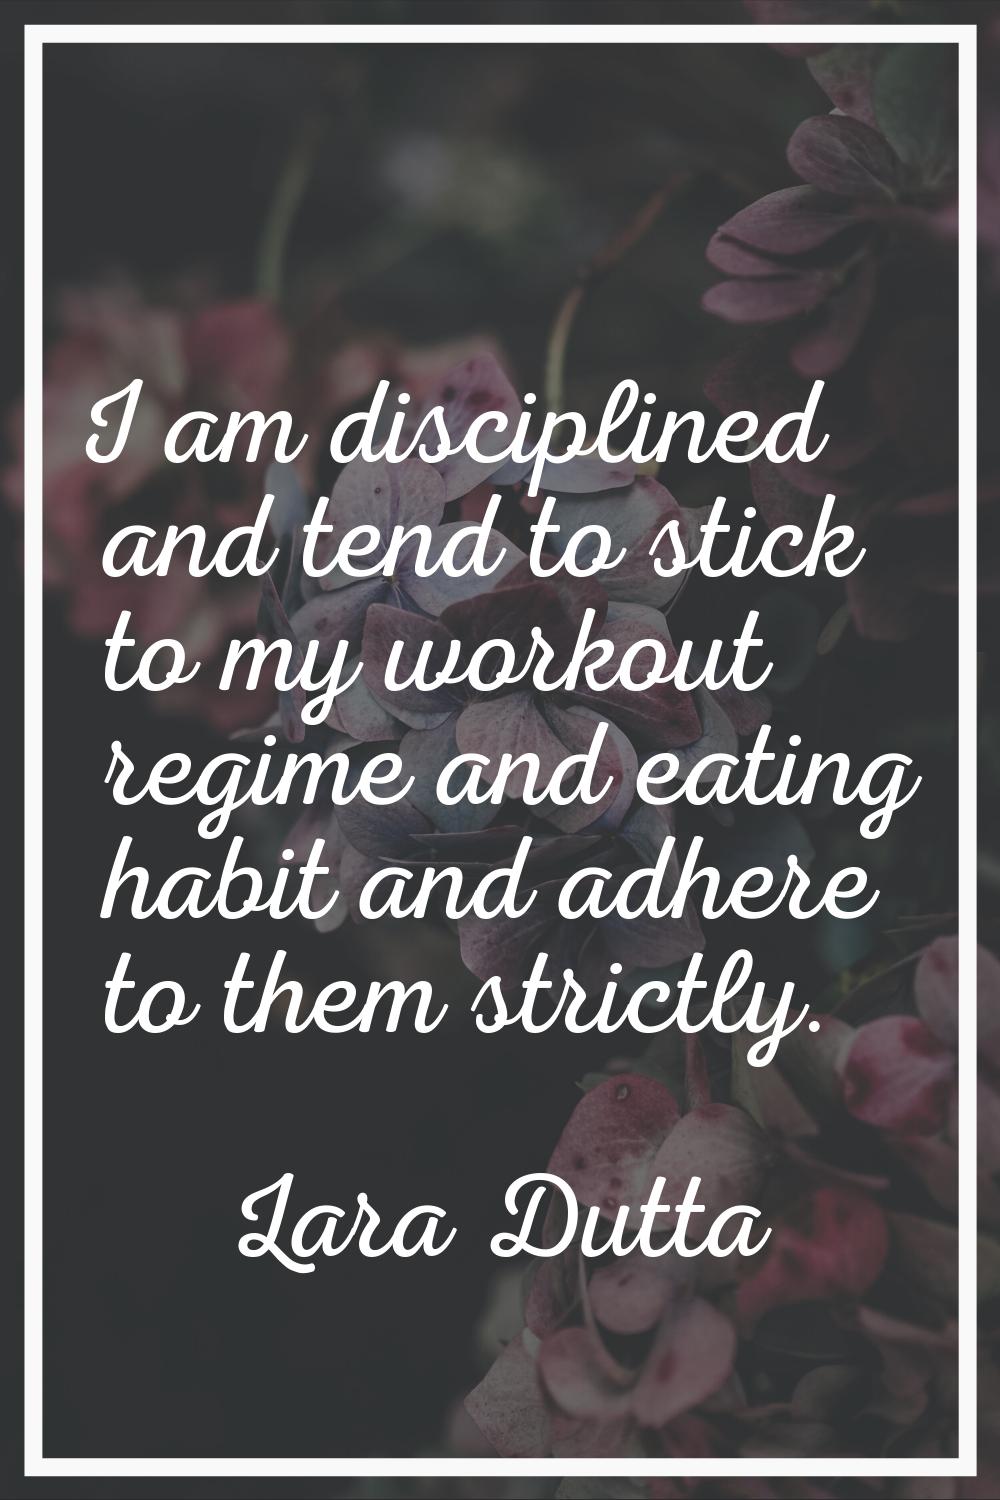 I am disciplined and tend to stick to my workout regime and eating habit and adhere to them strictl